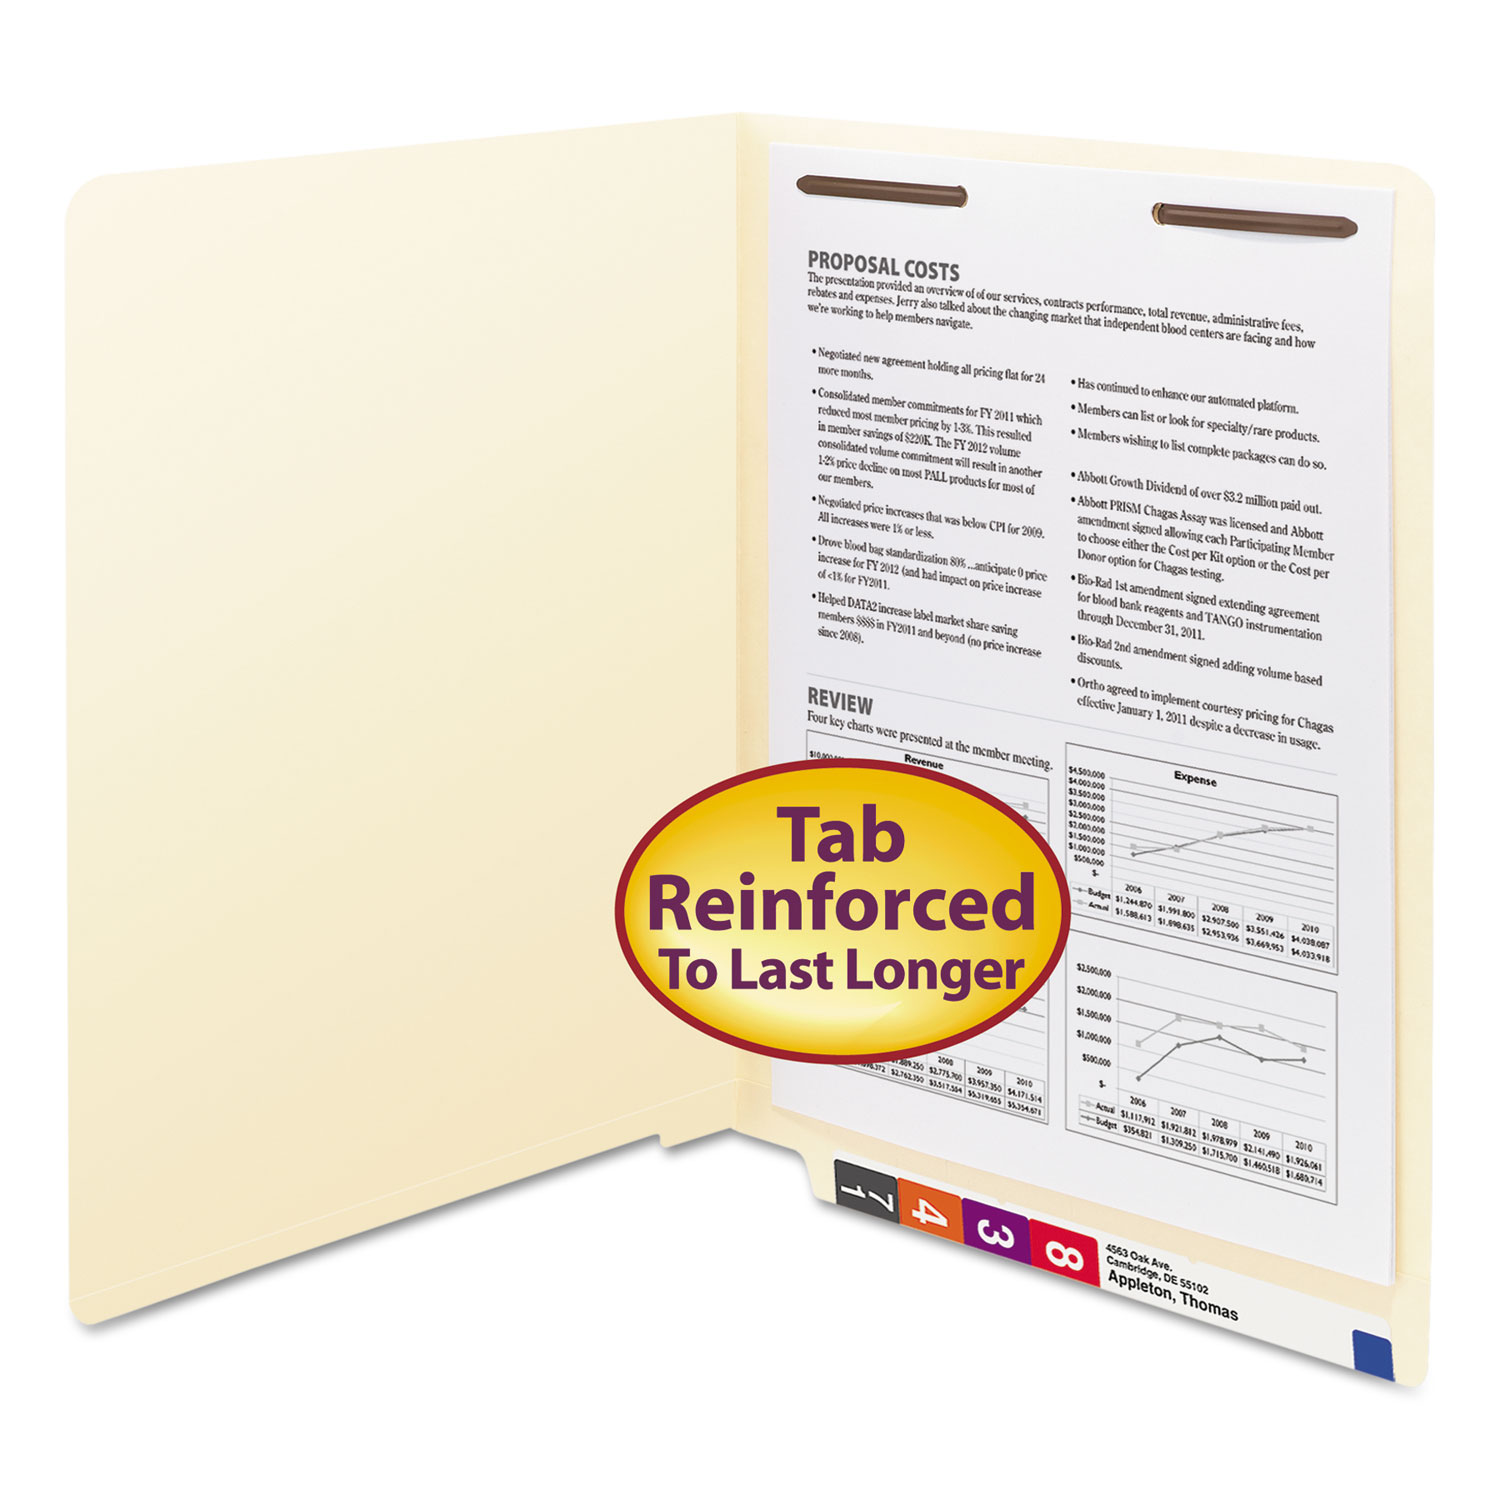 Manila End Tab 1-Fastener Folders with Reinforced Tabs, 0.75" Expansion, Straight Tab, Letter Size, 11 pt. Manila, 50/Box